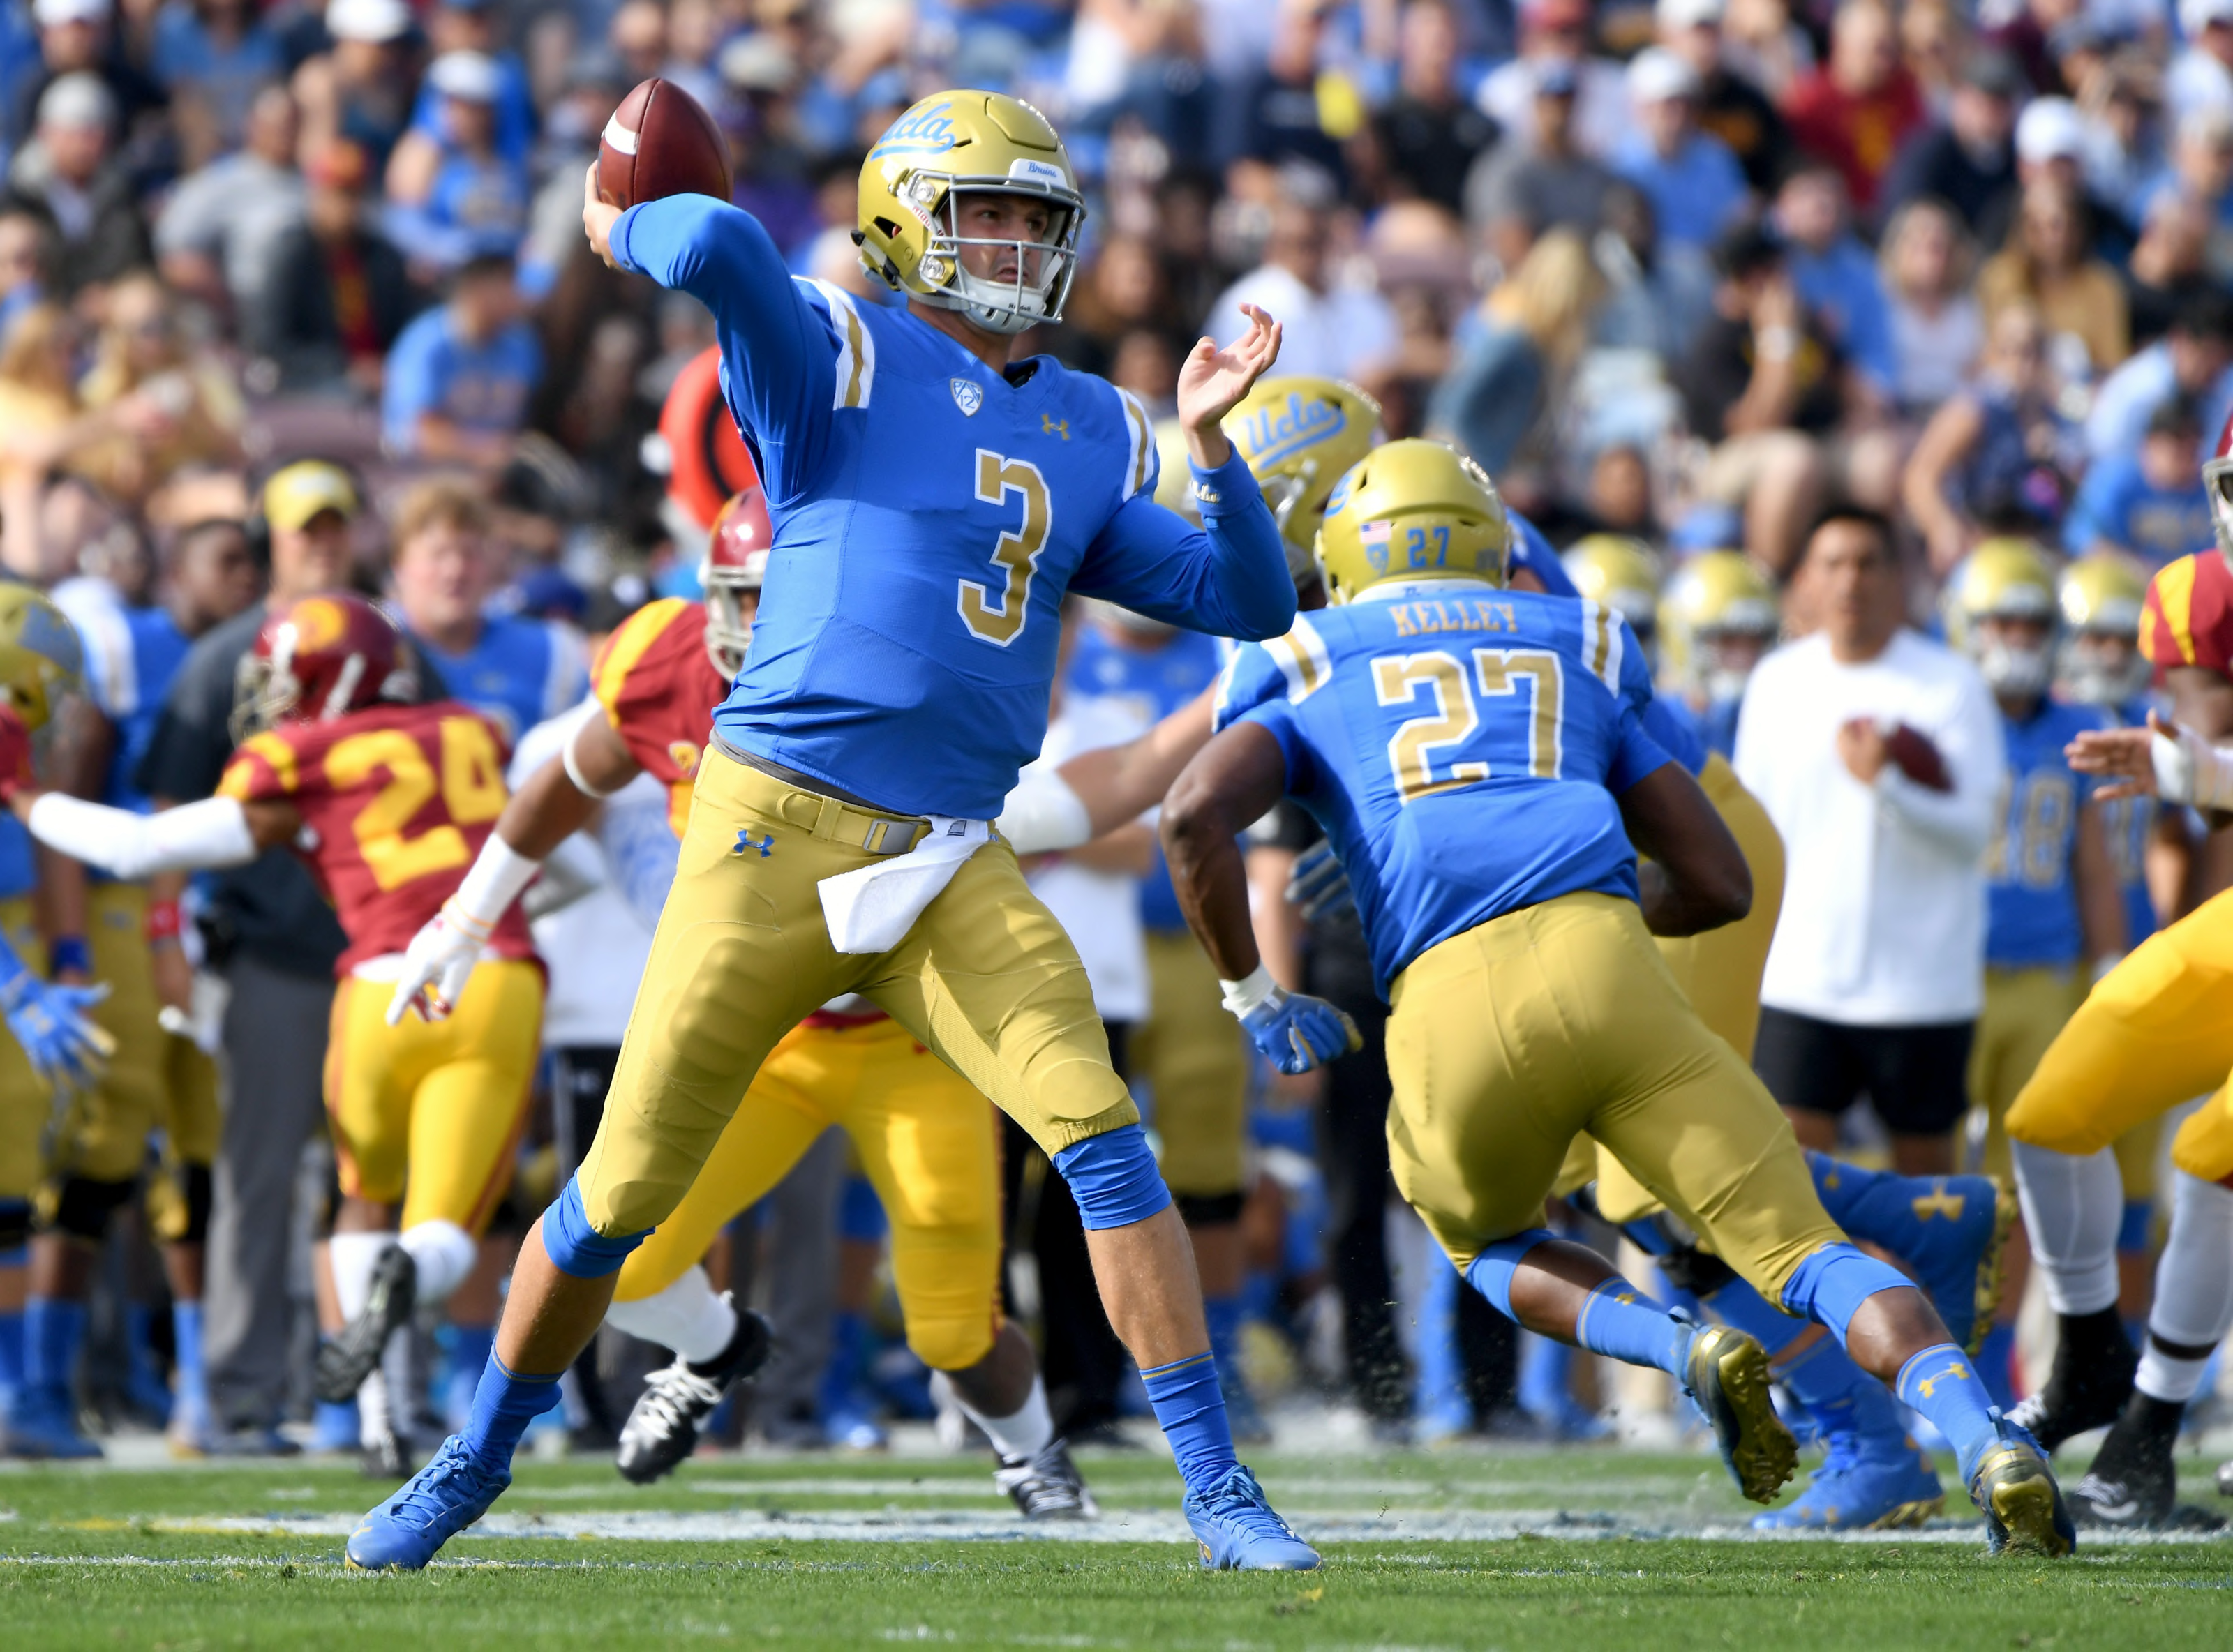 UCLA Football Play analysis from the USC game